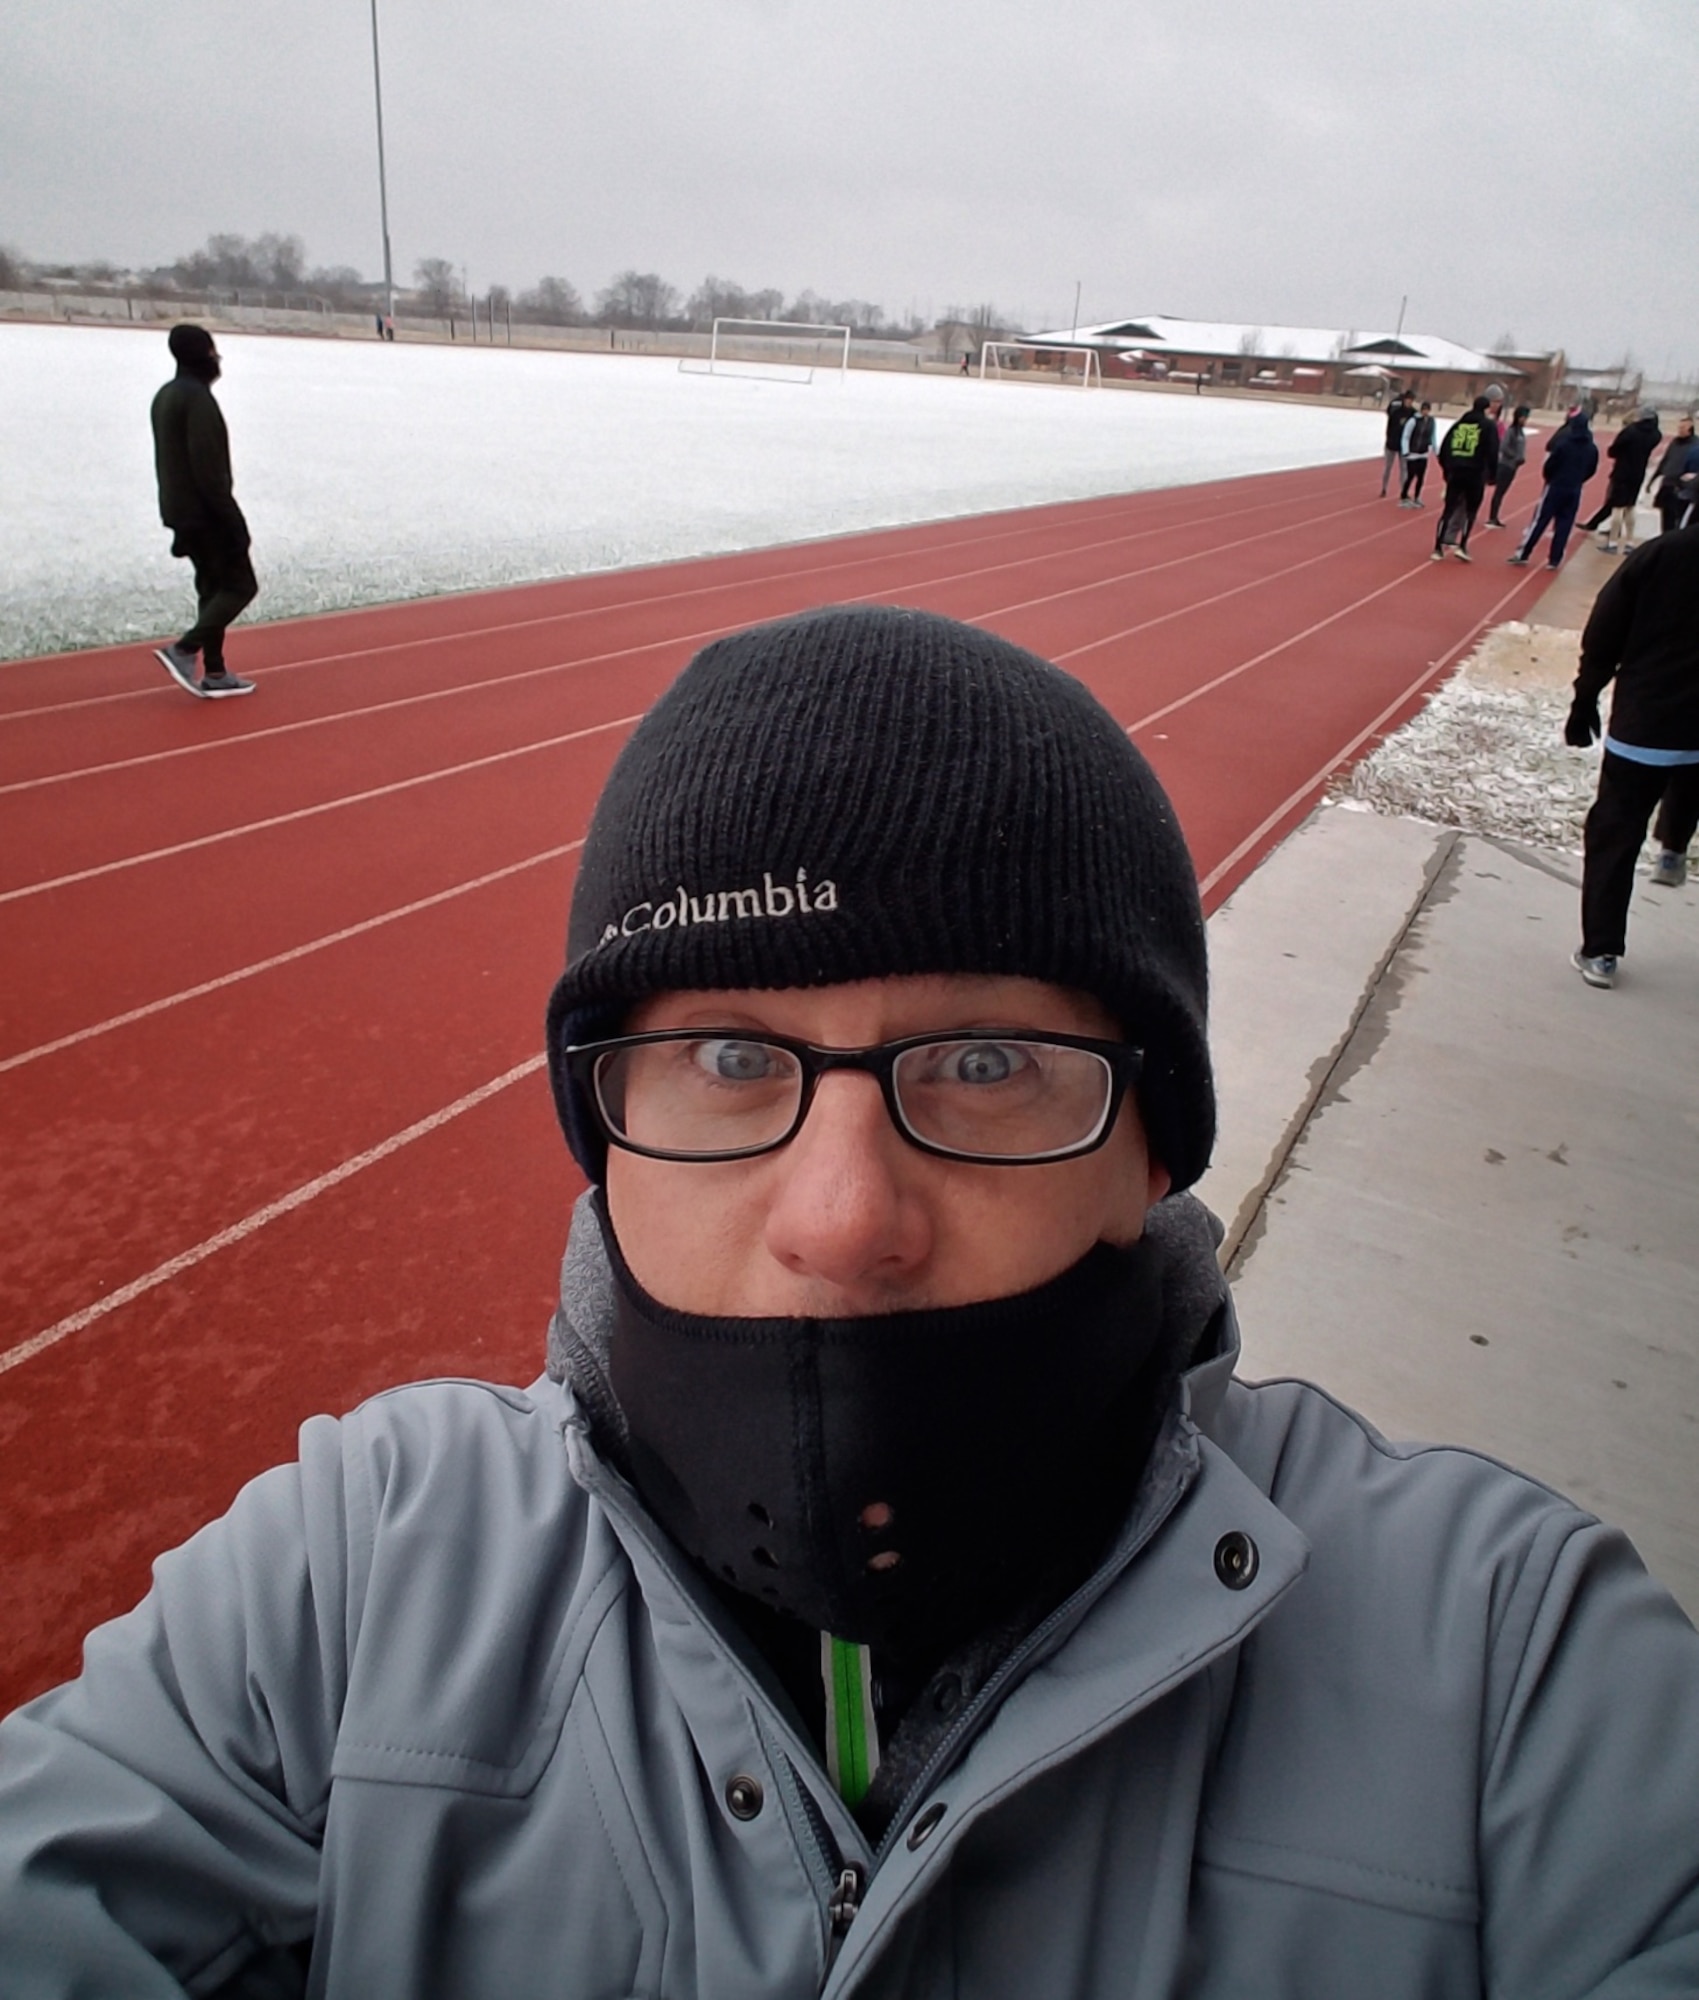 Brrrr, it's cold out.  Christopher Parr, 932nd Airlift Wing Public Affairs specialist takes a quick "selfie" in the snow before doing the Wednesday sprints, Feb. 6, 2017, Scott Air Force Base, Illinois.  Please checkout the weekly blog showcasing Parr's experience with the running clinic and how much he loves Wednesdays.  (U.S. Air Force photo by Christopher Parr)